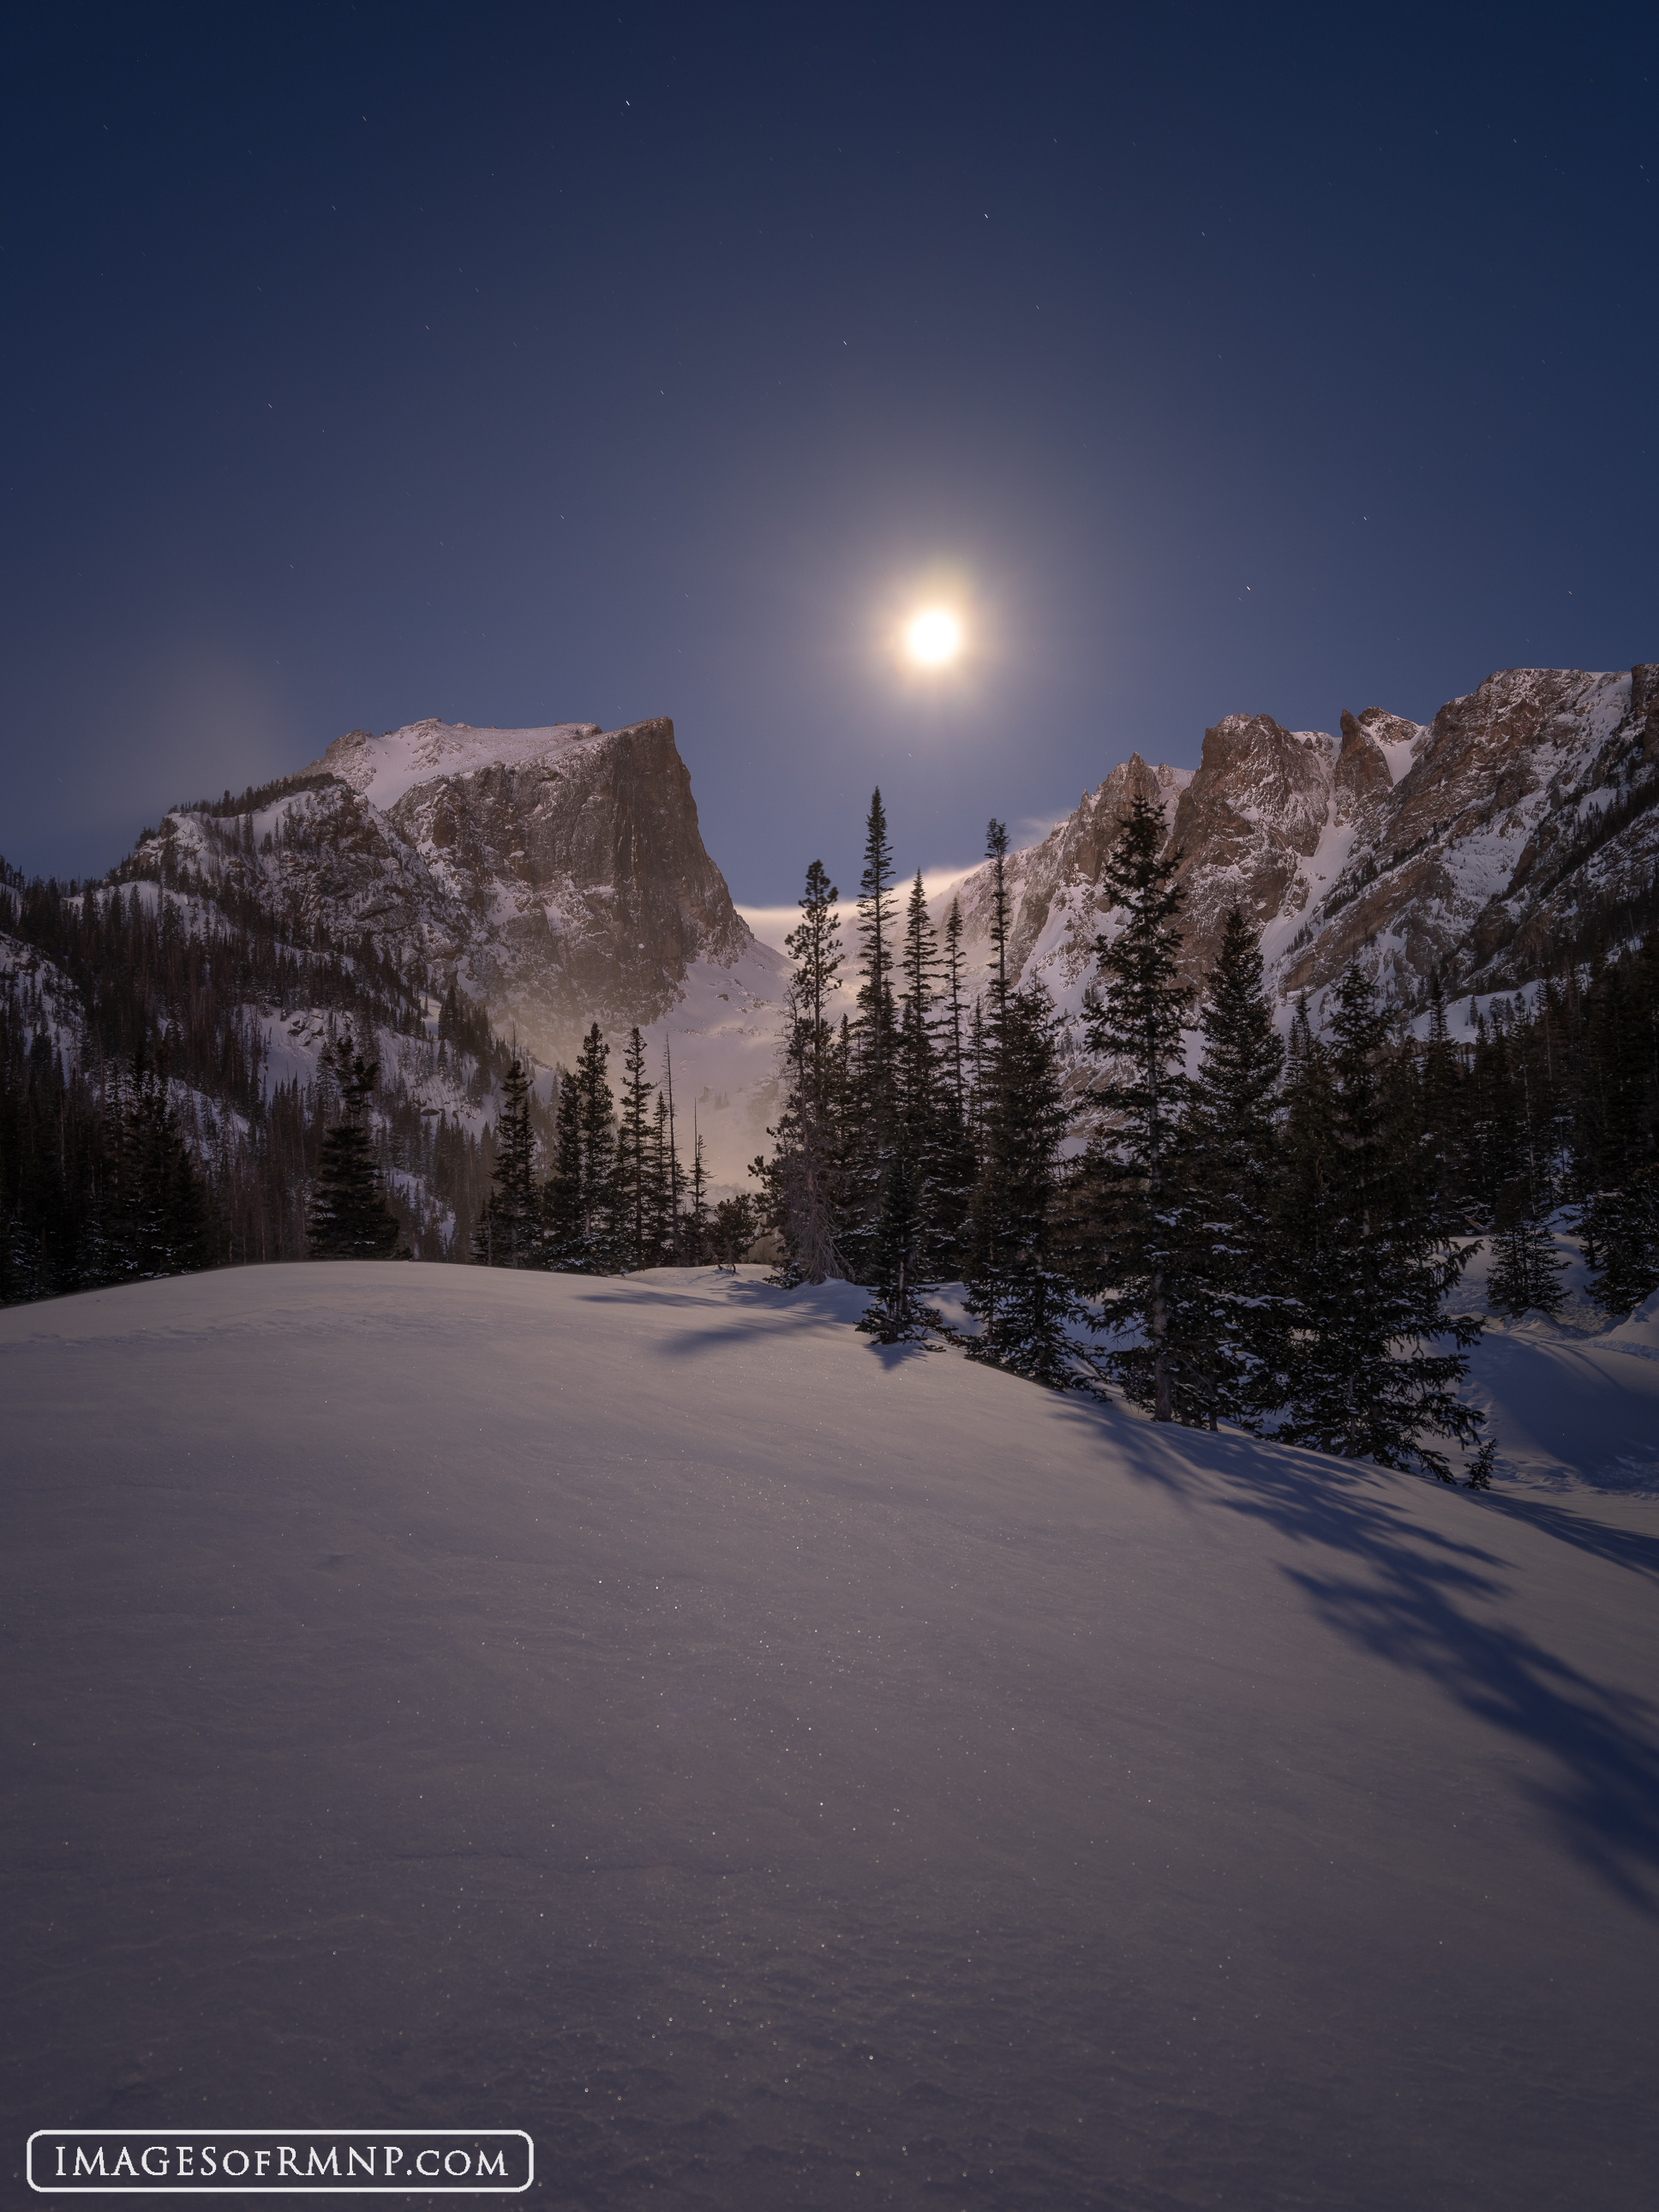 I made this photo on an early February morning in the predawn light as the moon set between Hallett Peak and Flattop Mountain...